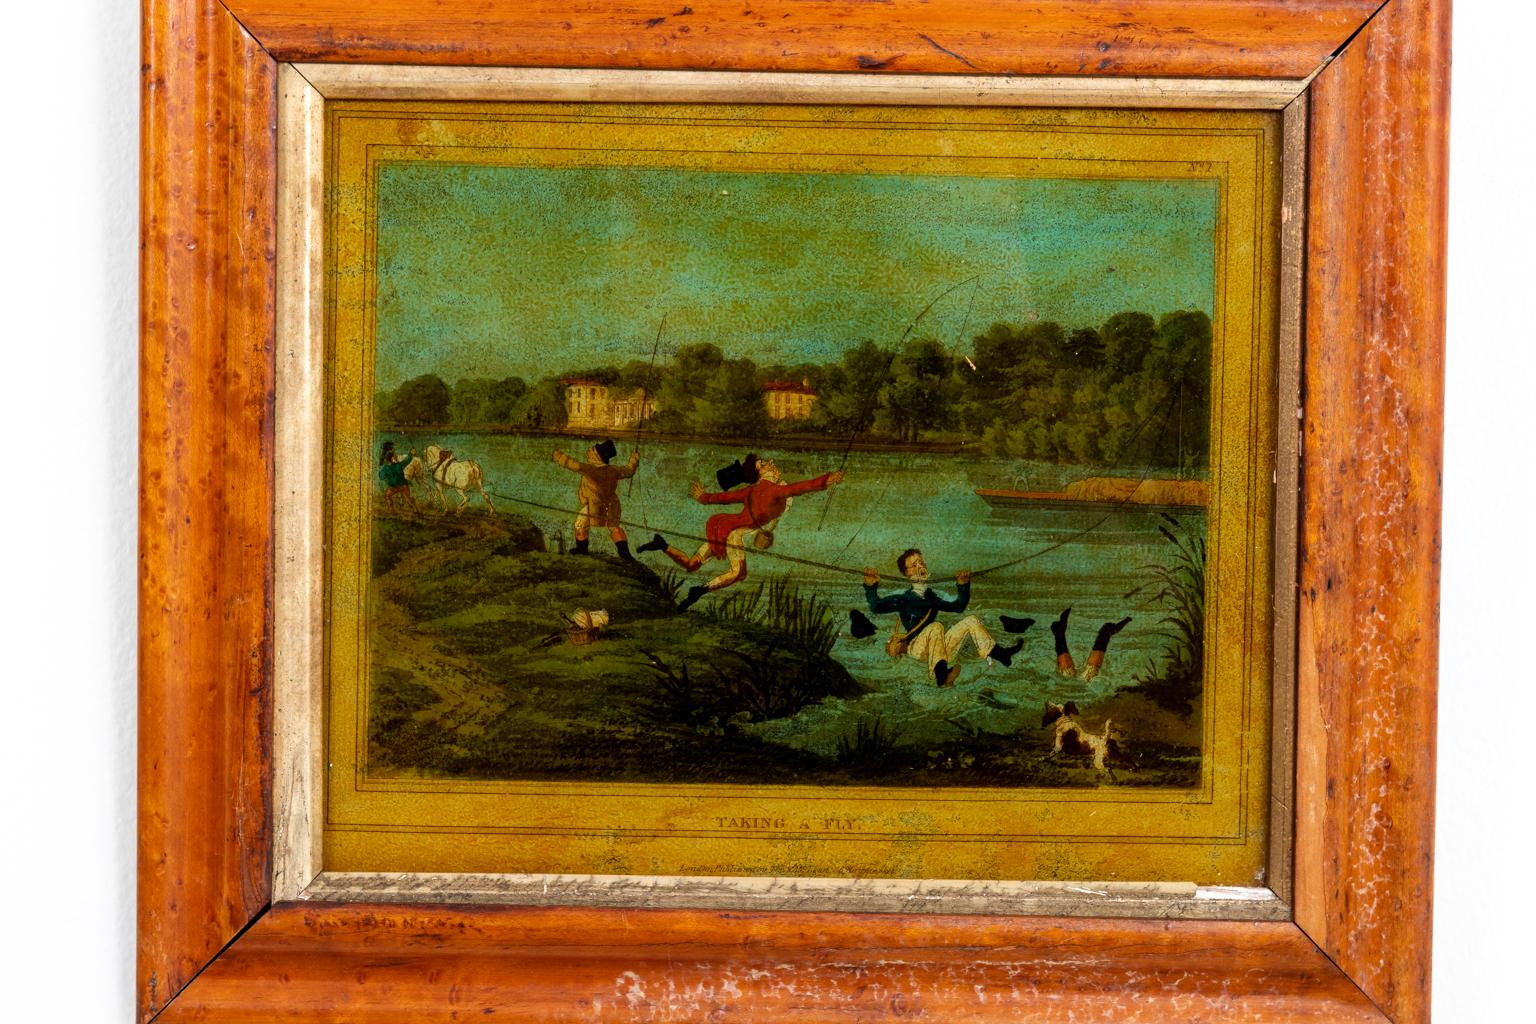 Framed English print mounted behind glass featuring a fishing scene with figures, circa 1880s. Please note of wear consistent with age including minor wear and slight damage to frame. There is also evidence of restoration to one frame.